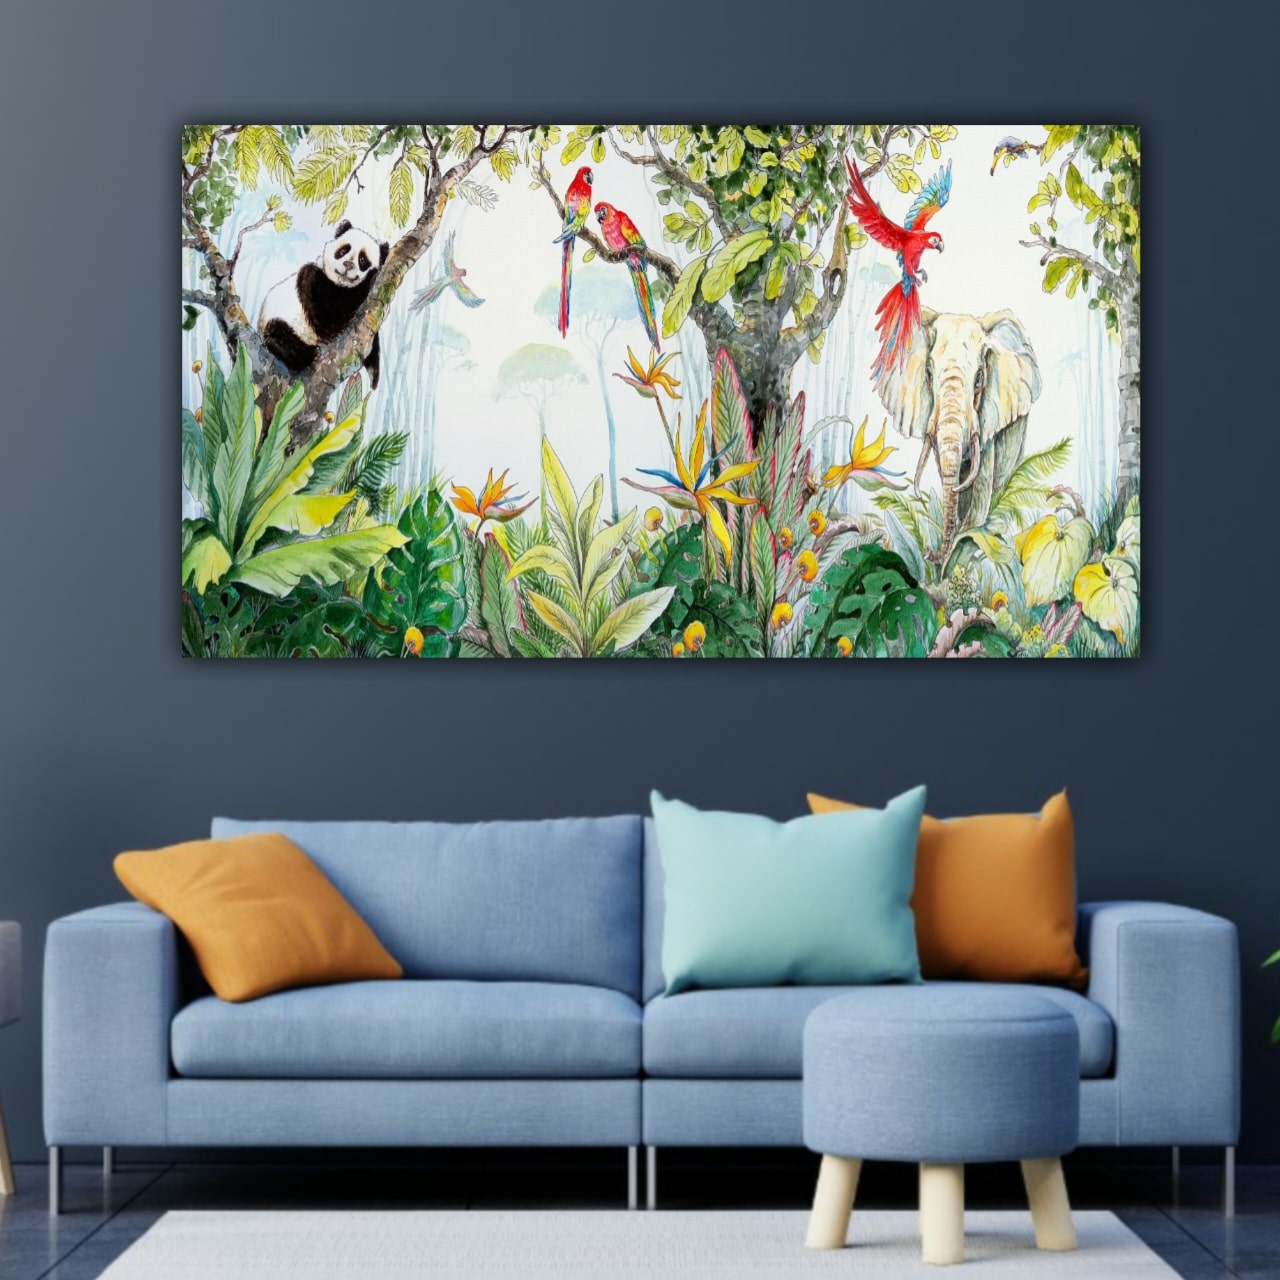 Canvas Painting Forest Landscape Wall Painting Frame